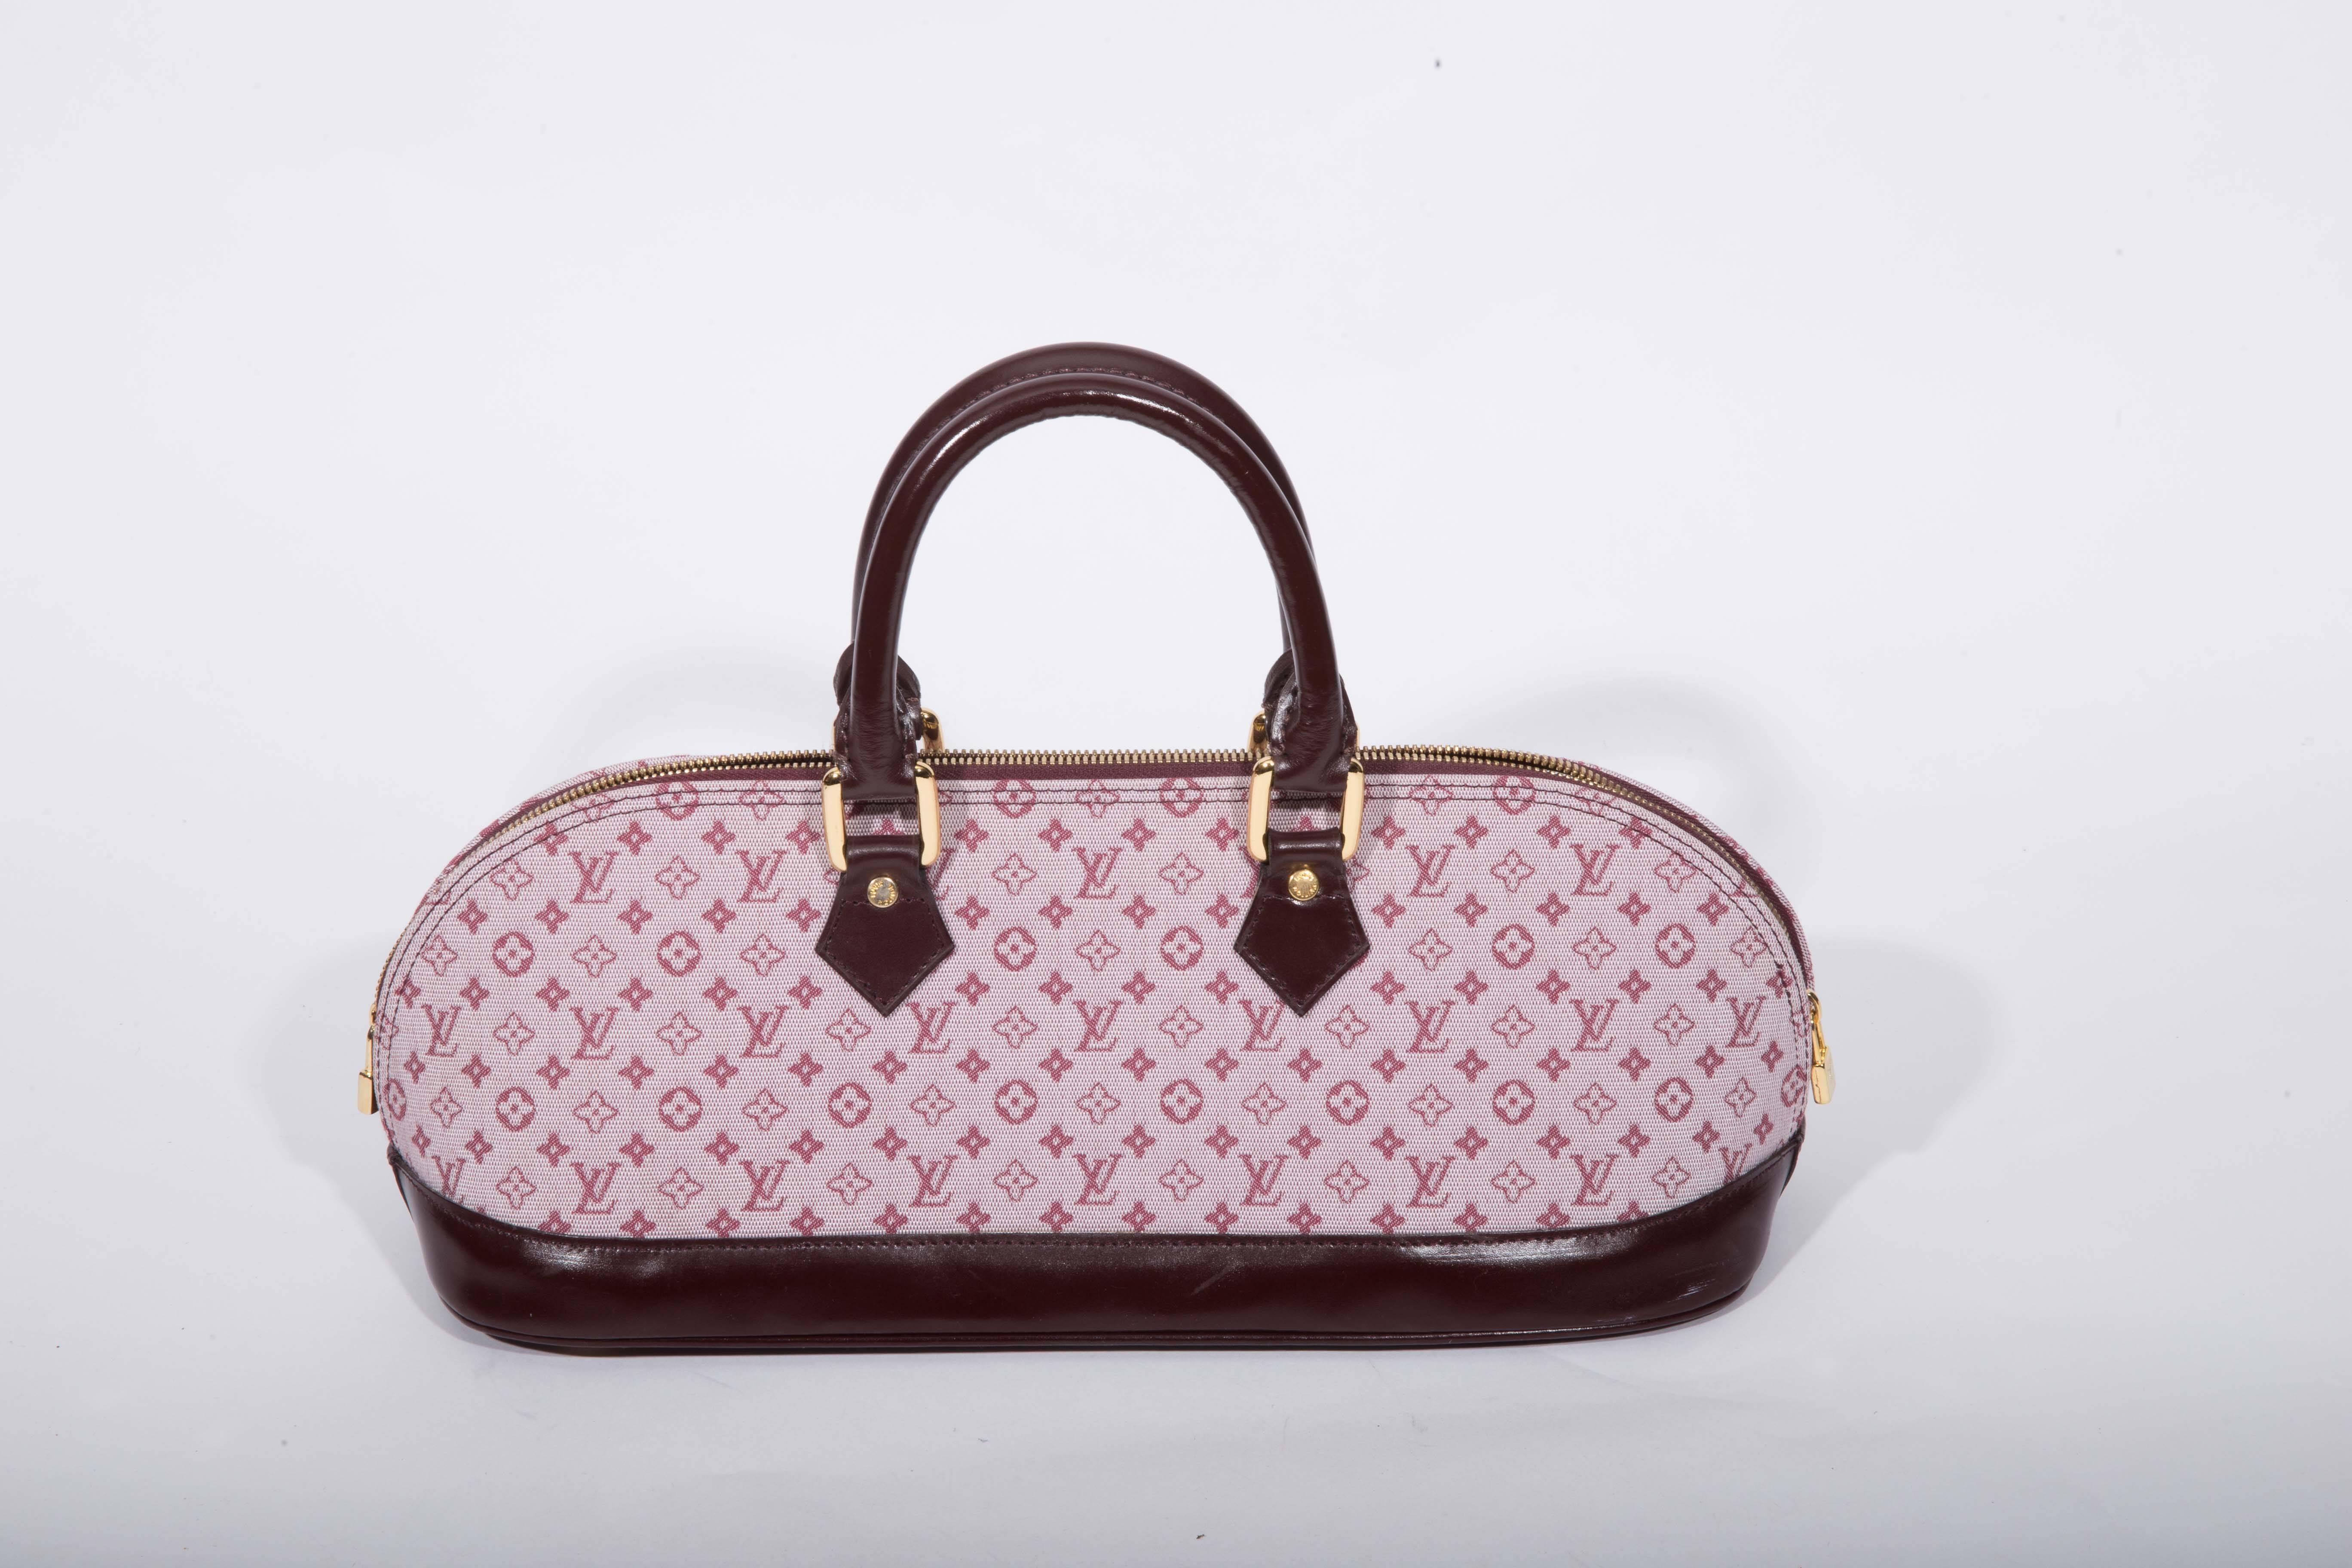 Stunning Louis Vuitton Red Mono Mini Lin Alma Long. This bag is in excellent condition and features dark leather trim and top handles. 